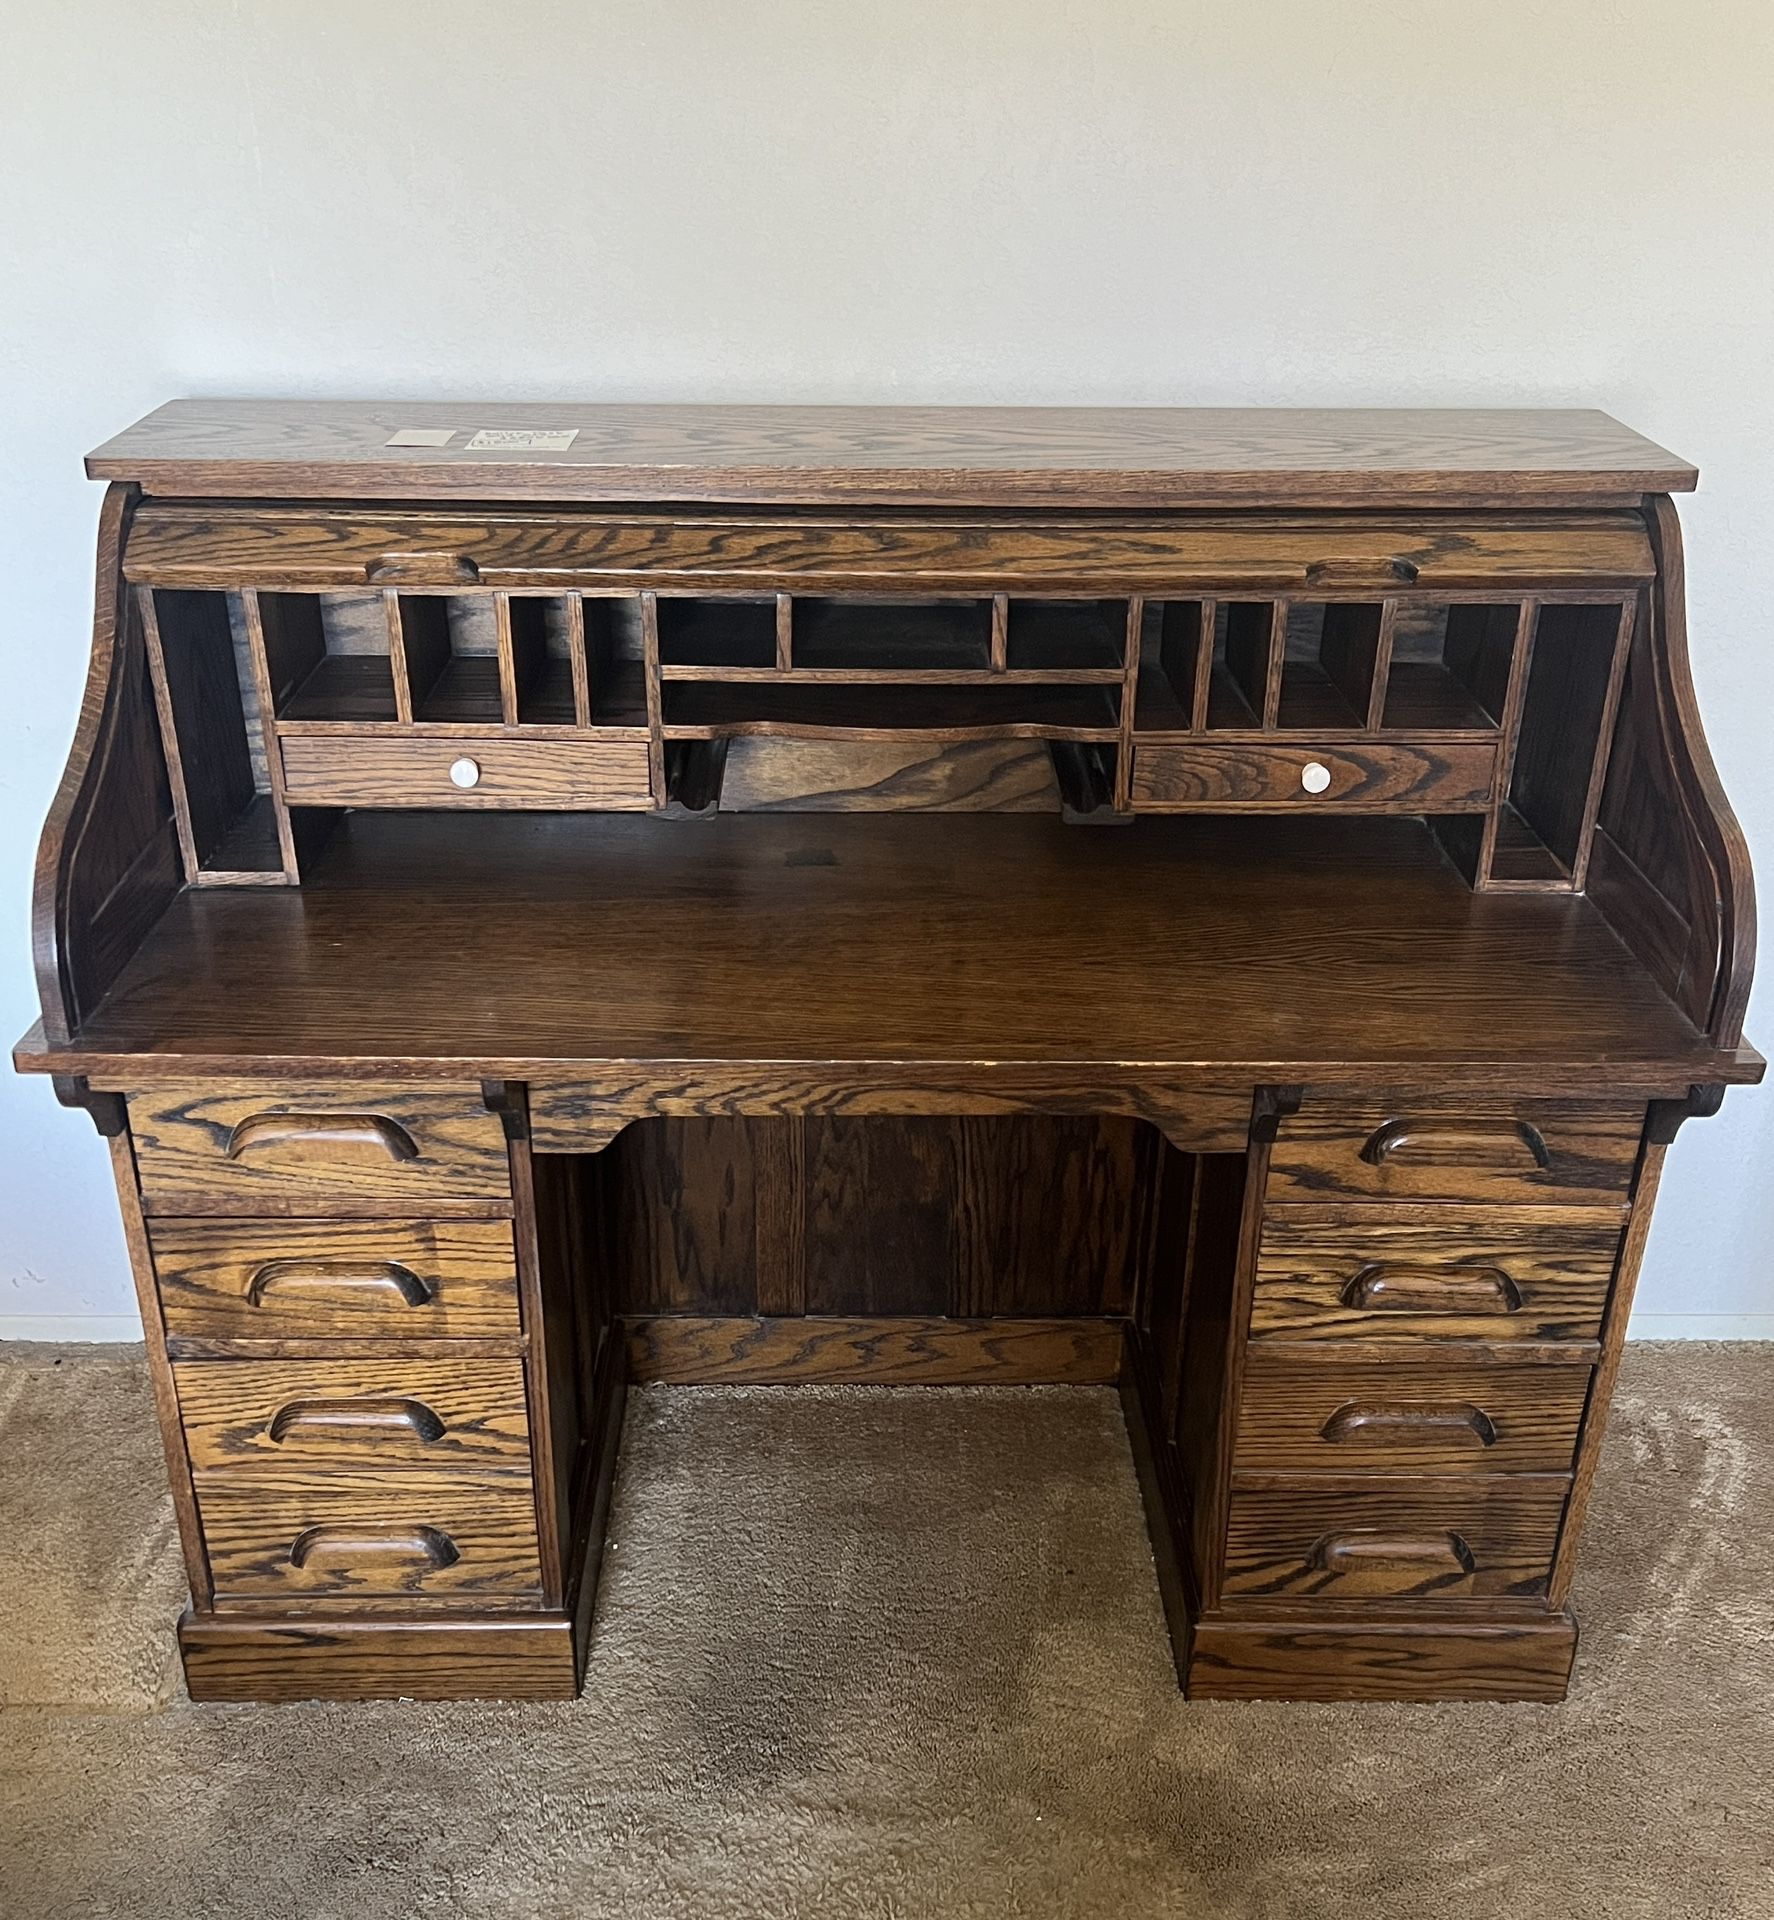 Solid Oak Roll-Top  Desk.  Smoke Free Home. $75 Old Spanish Trail And Escalate A 